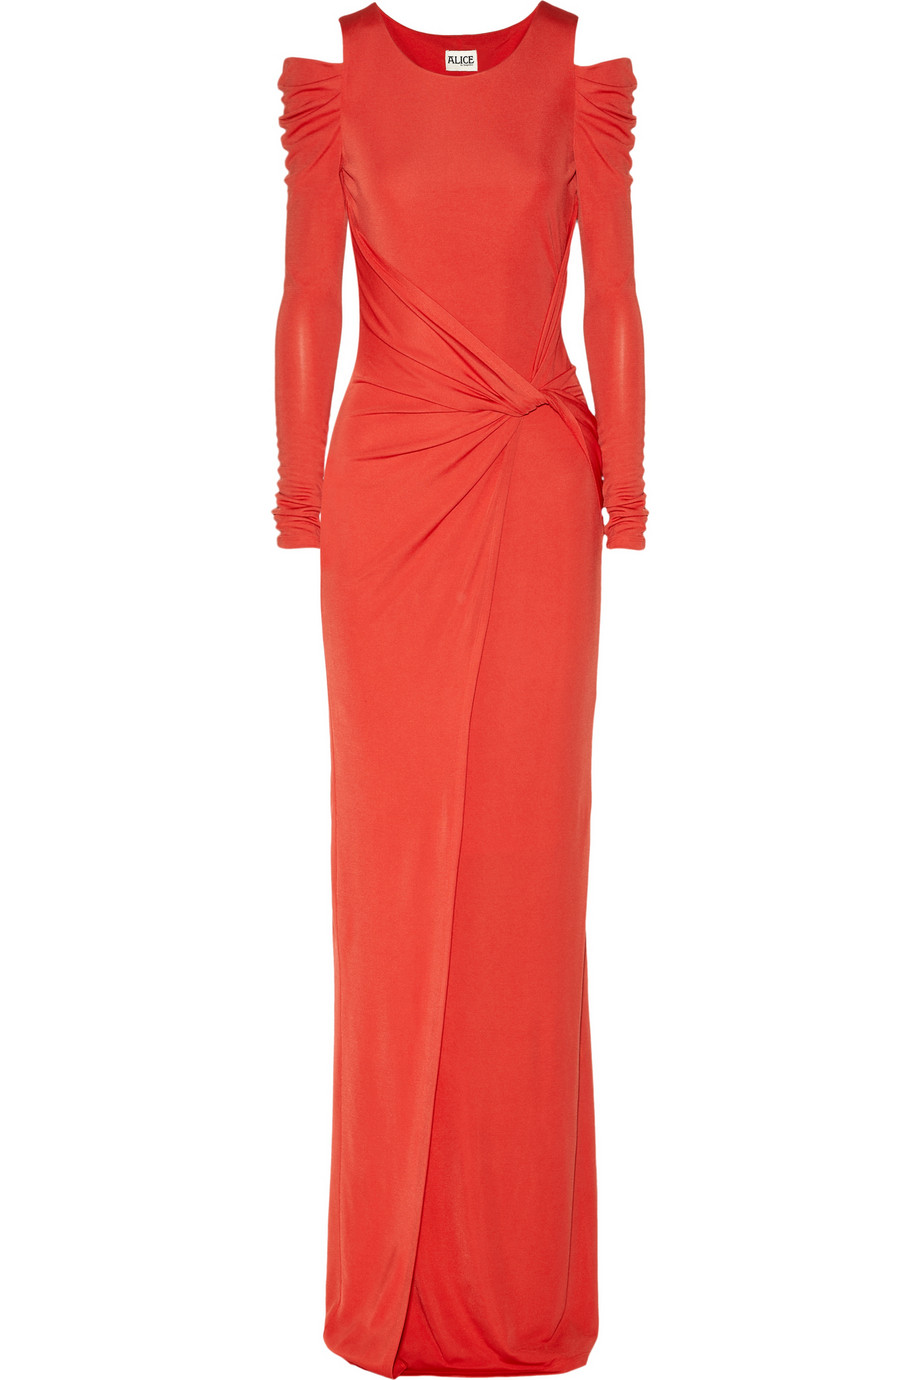 Lyst - Alice By Temperley Lucio Draped Crepe Jersey Maxi Dress in Red